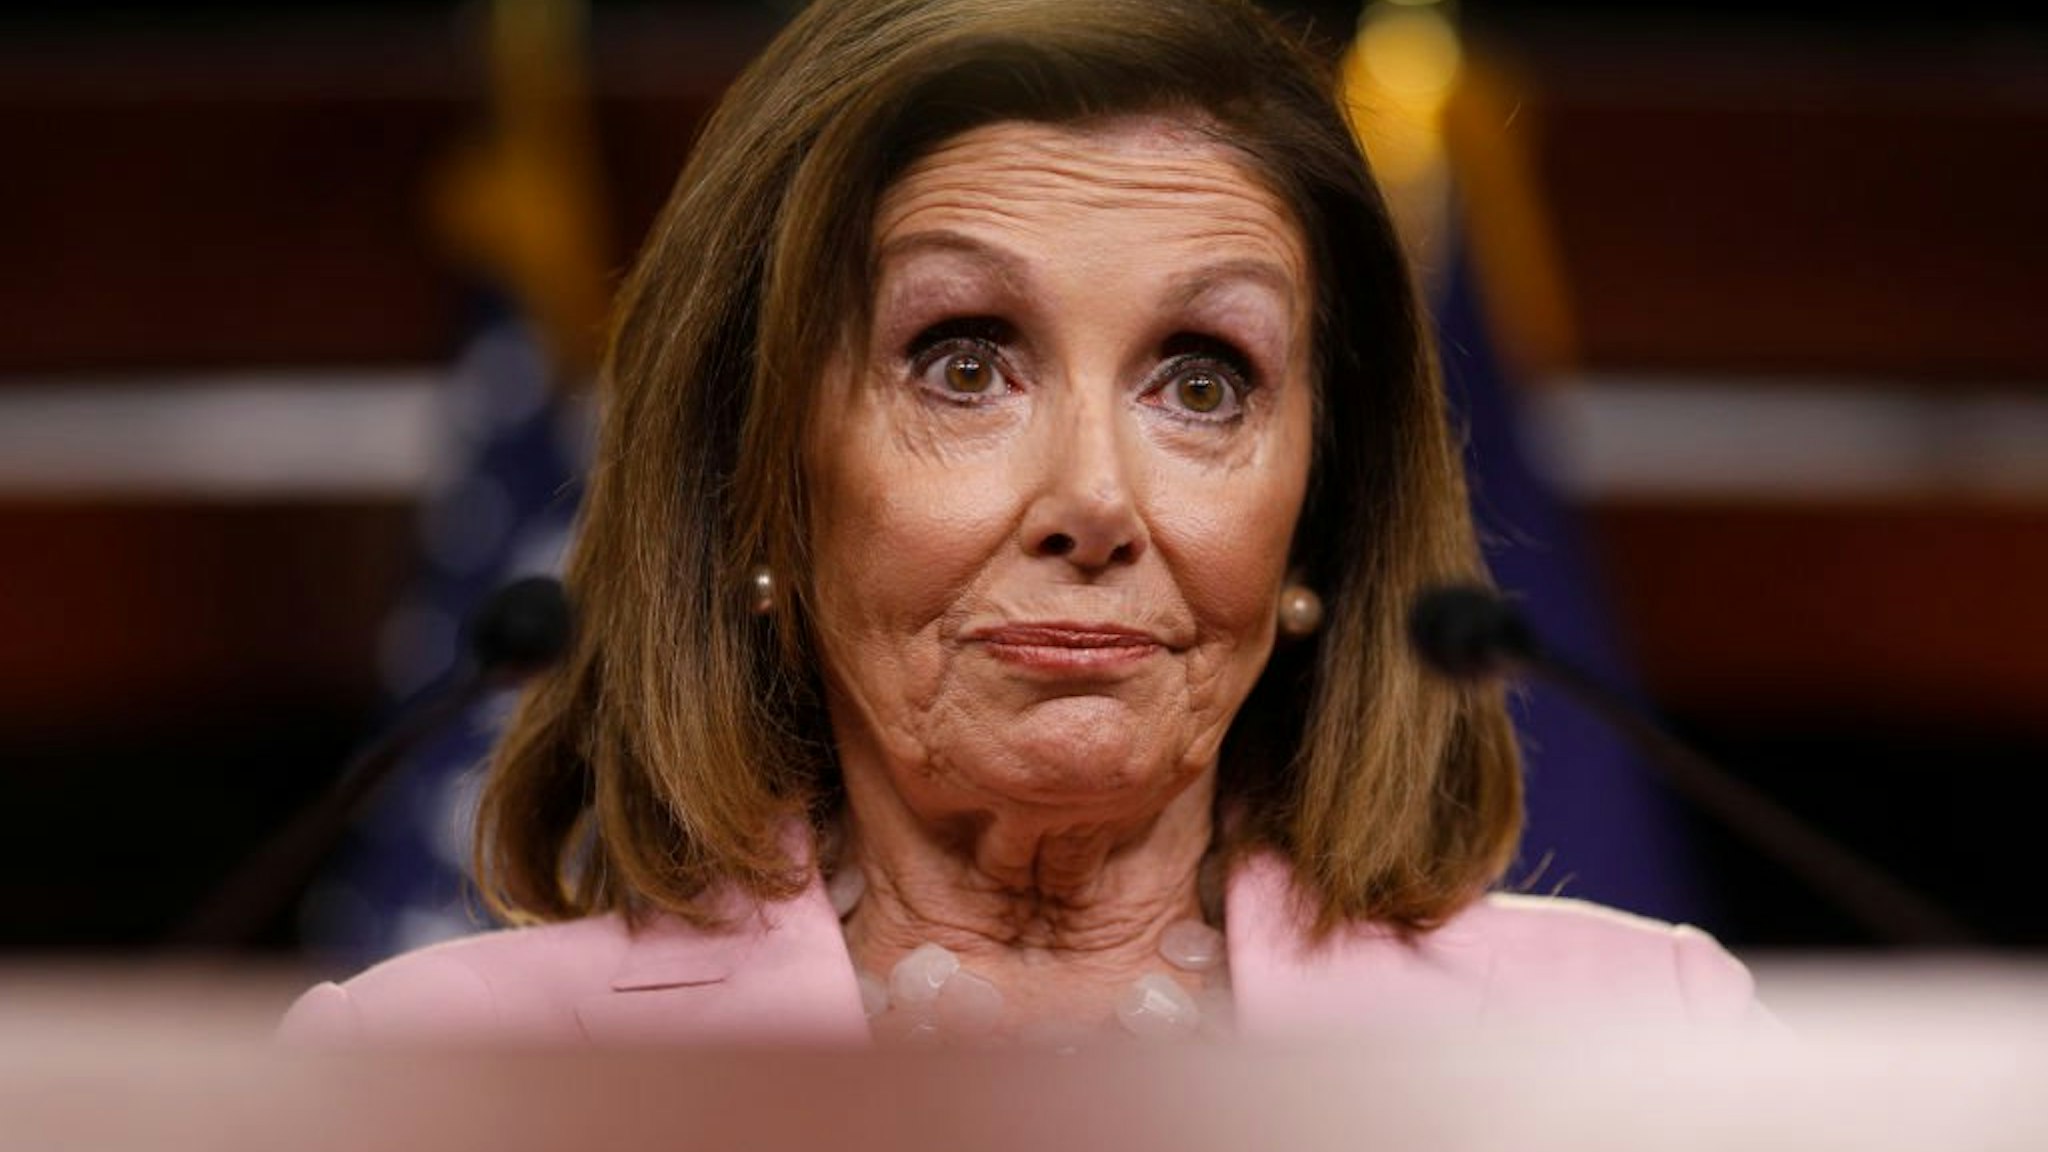 Nancy Pelosi delivers remarks duringher weekly news conference on Capitol Hill September 12, 2019